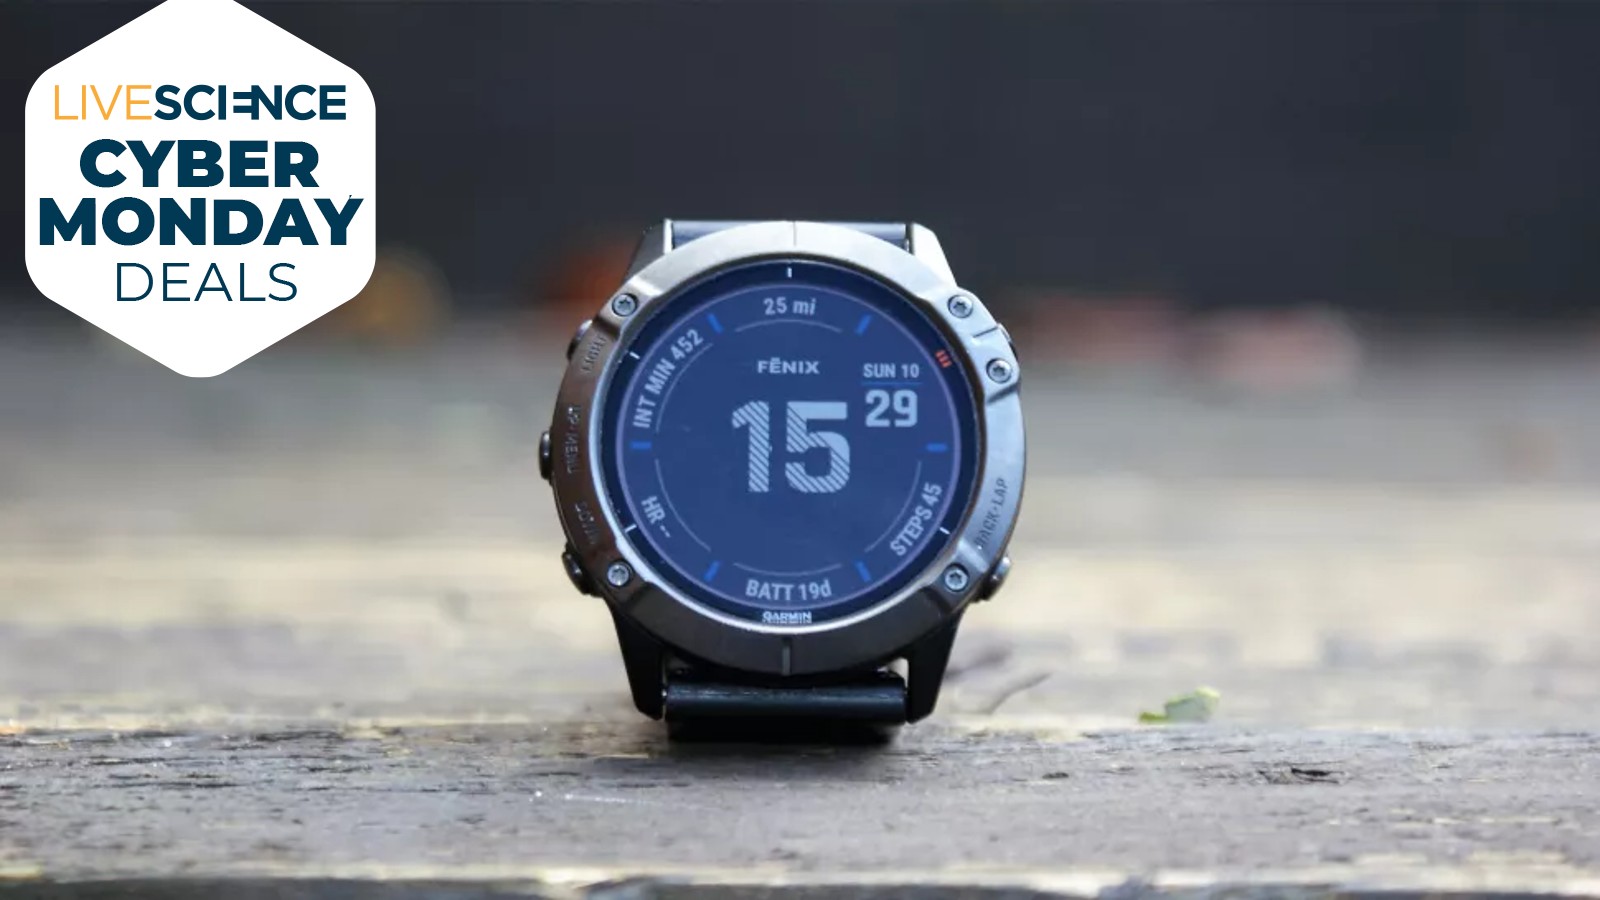 Don't delay — just a few hours left to save 42% on the Garmin Fenix 6X Pro Solar for Cyber Monday